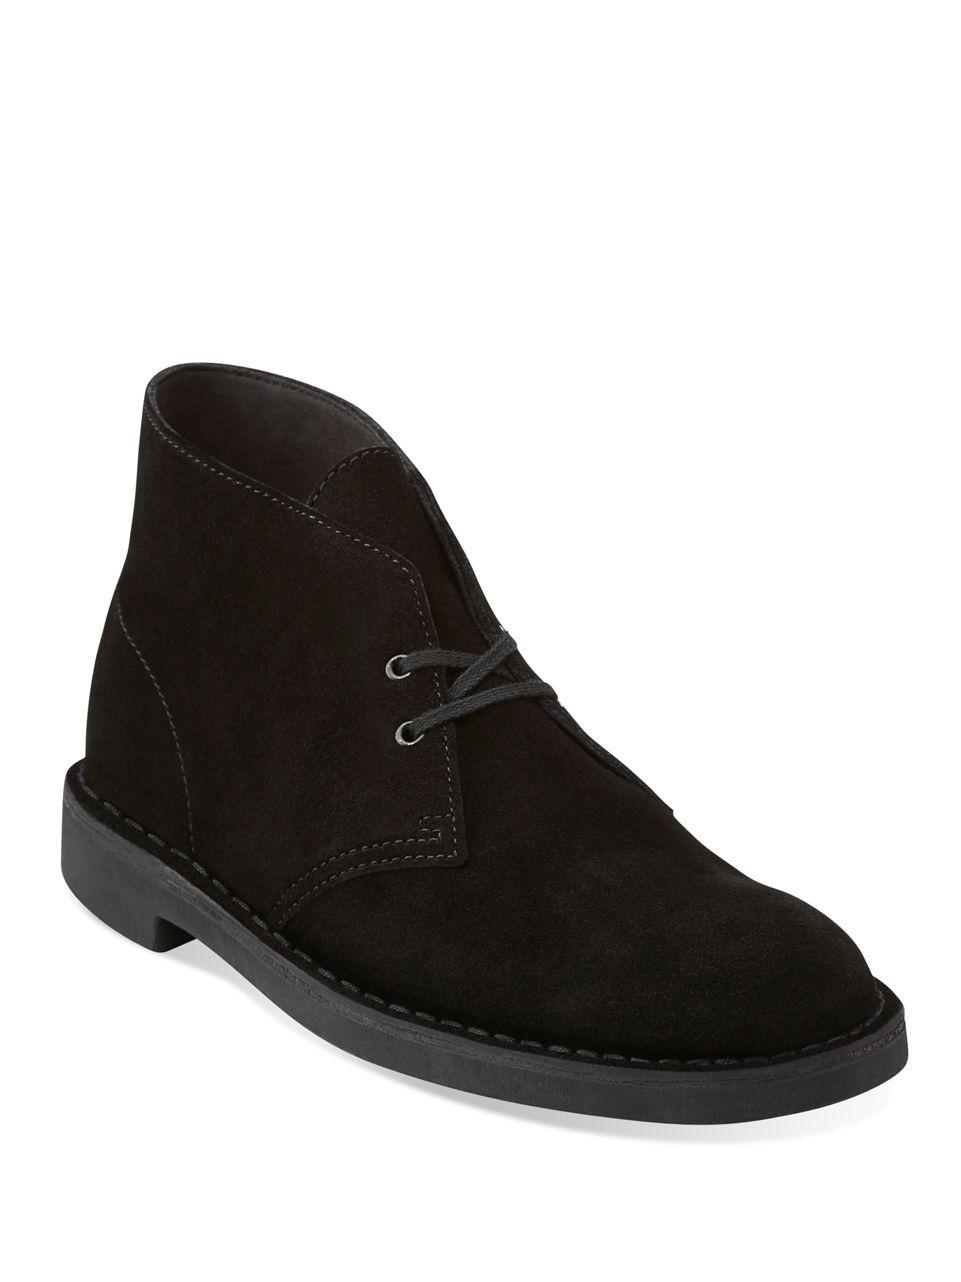 Clarks Bushacre 2 Suede Chukka Boots in Black for Men - Save 6% | Lyst